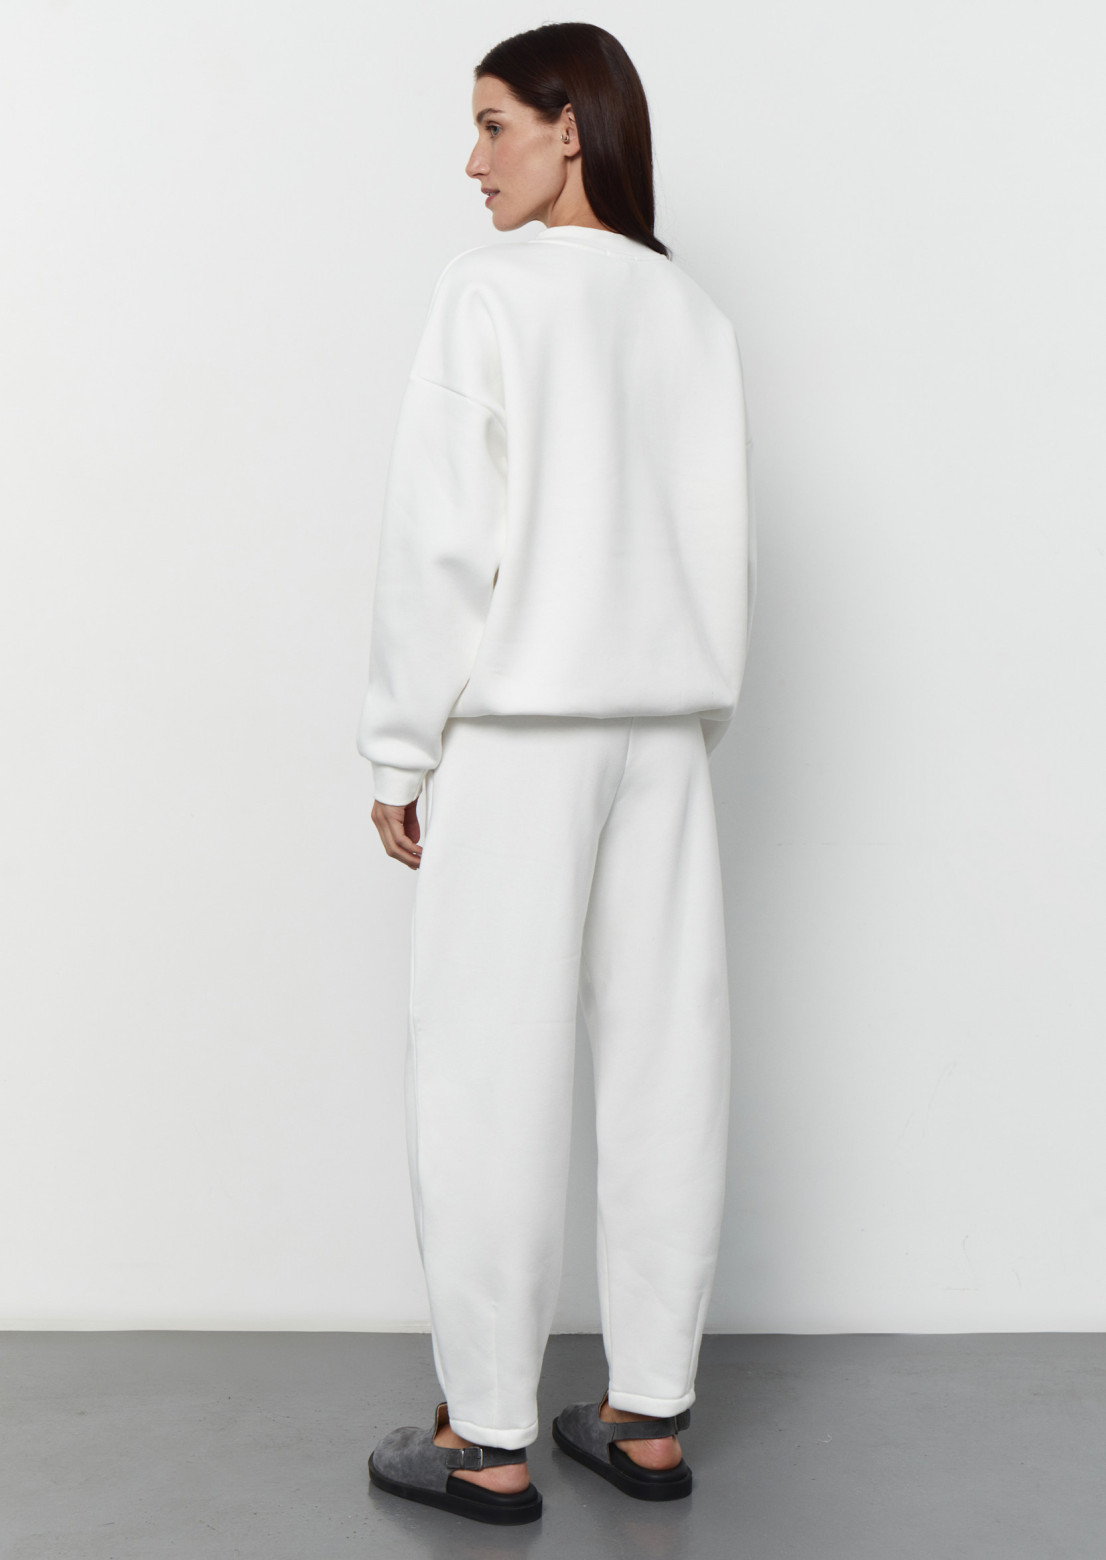 Milk color three-thread insulated suit with print "prapor" sweatshirt and pleated front trousers